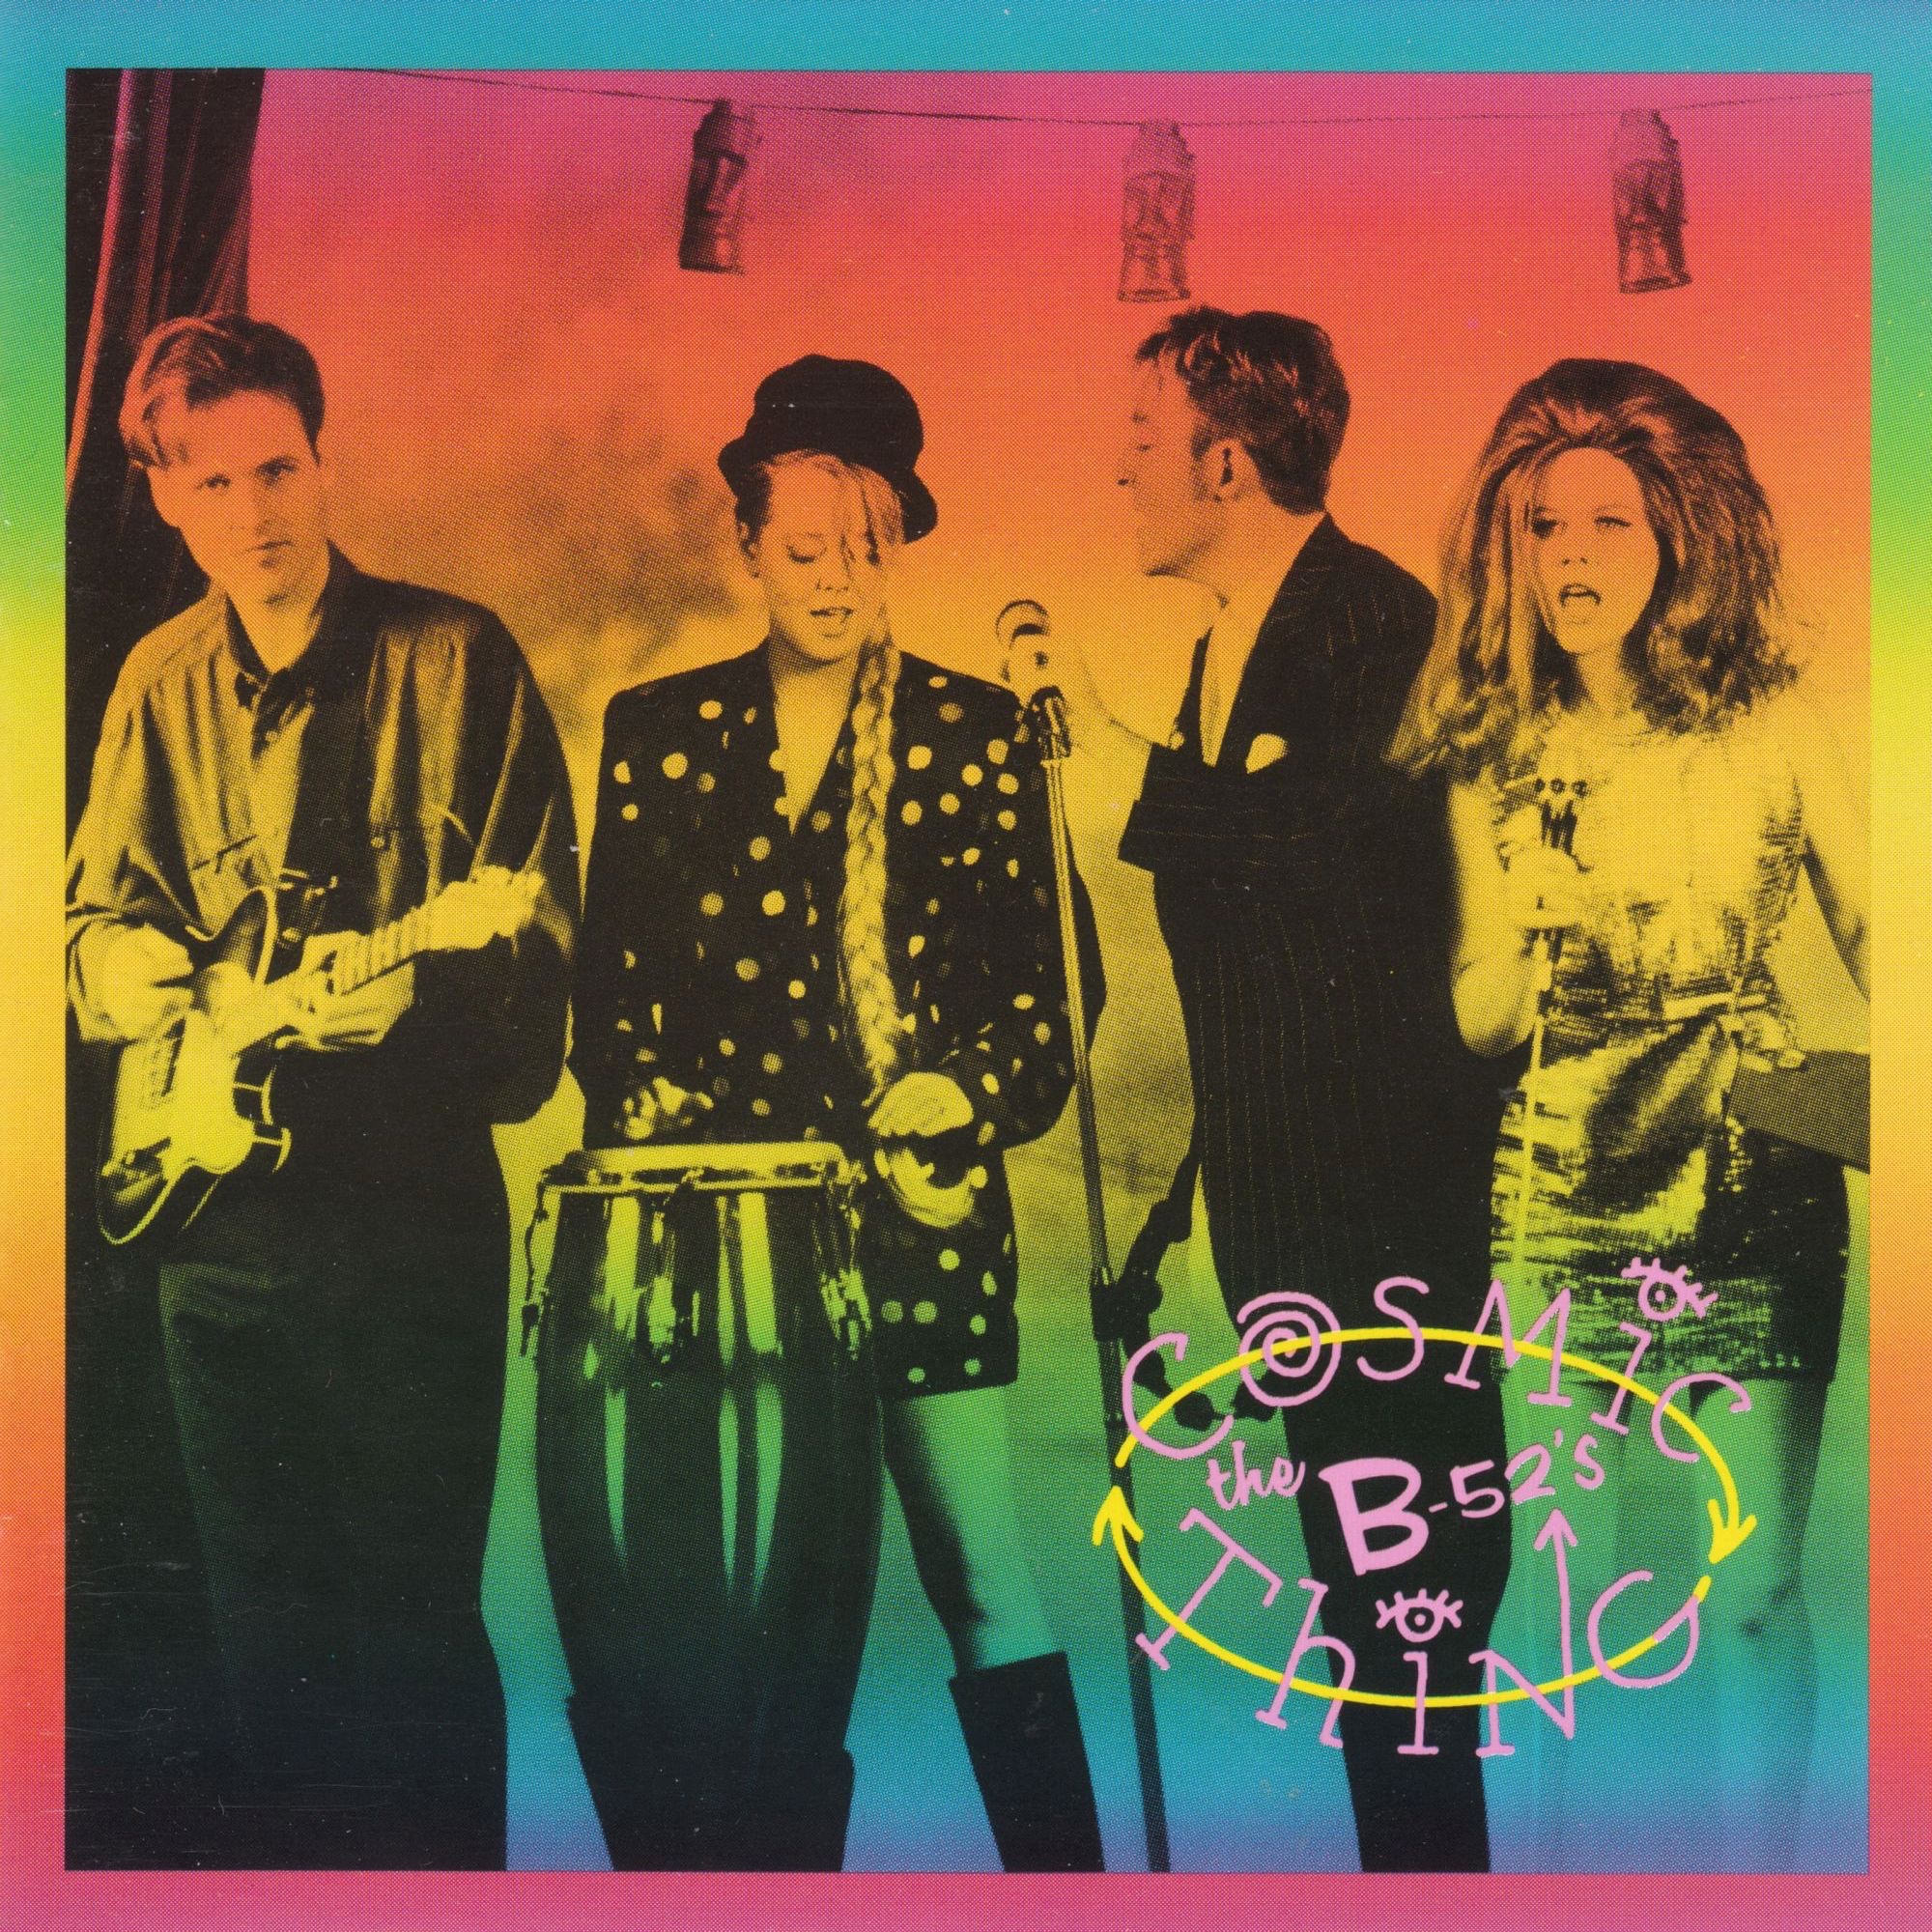 Art for Love Shack by B-52's